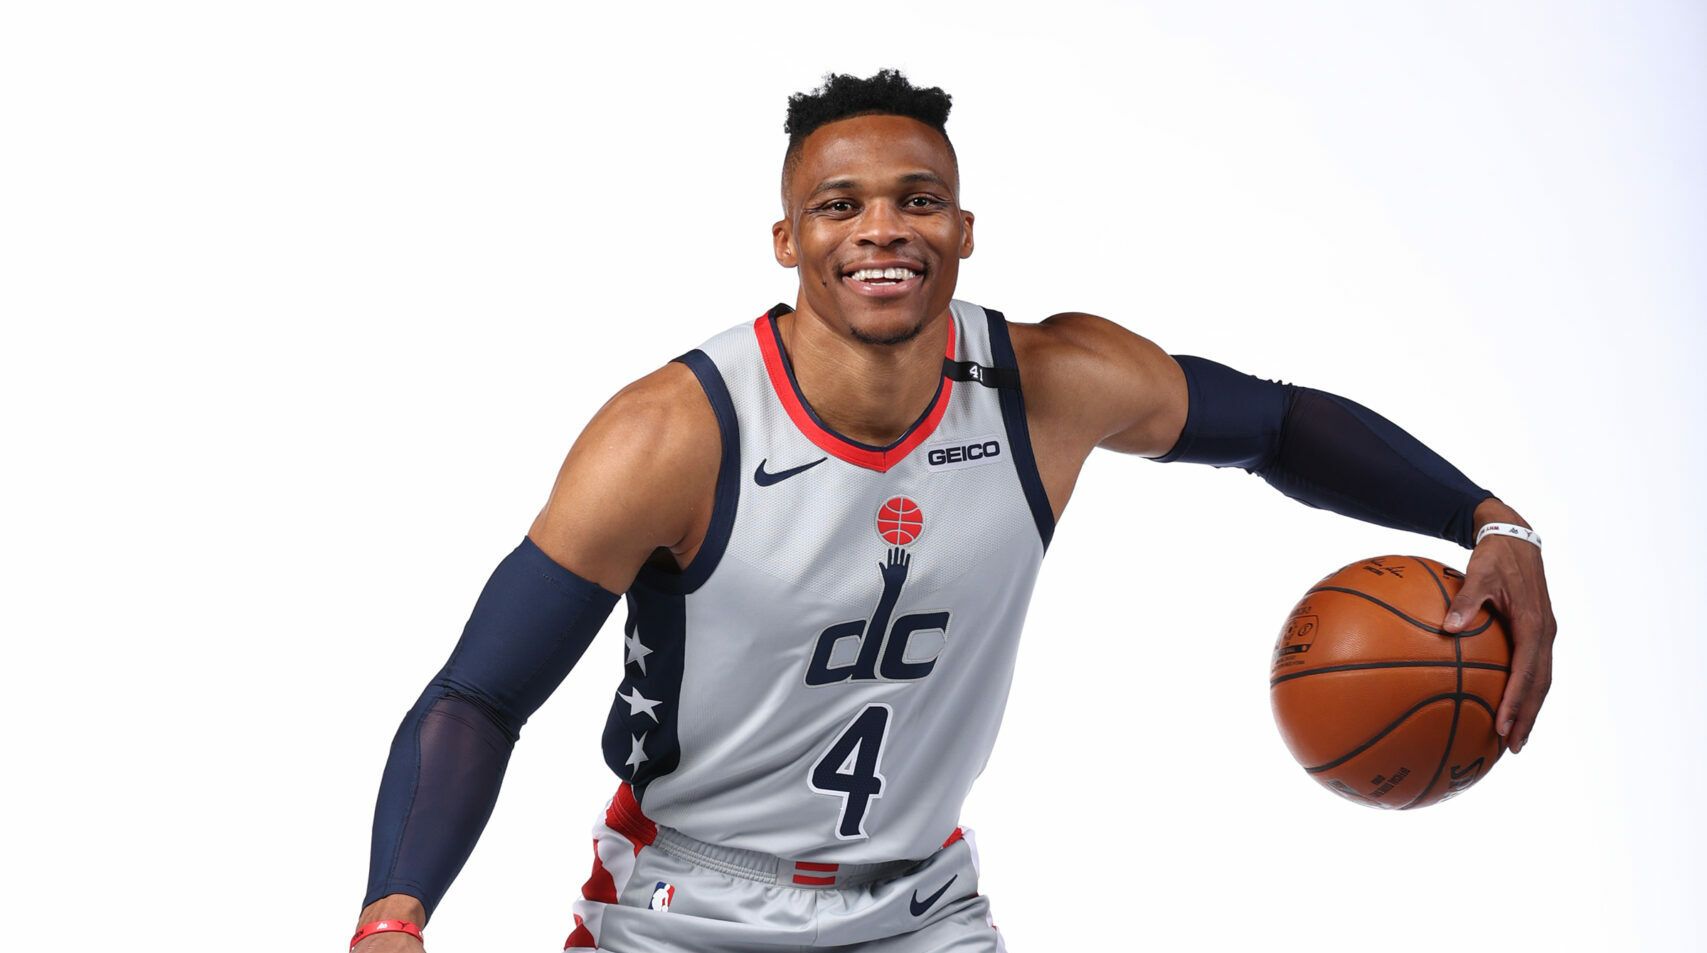 An unapologetic Russell Westbrook is ready for new challenge with Wizards